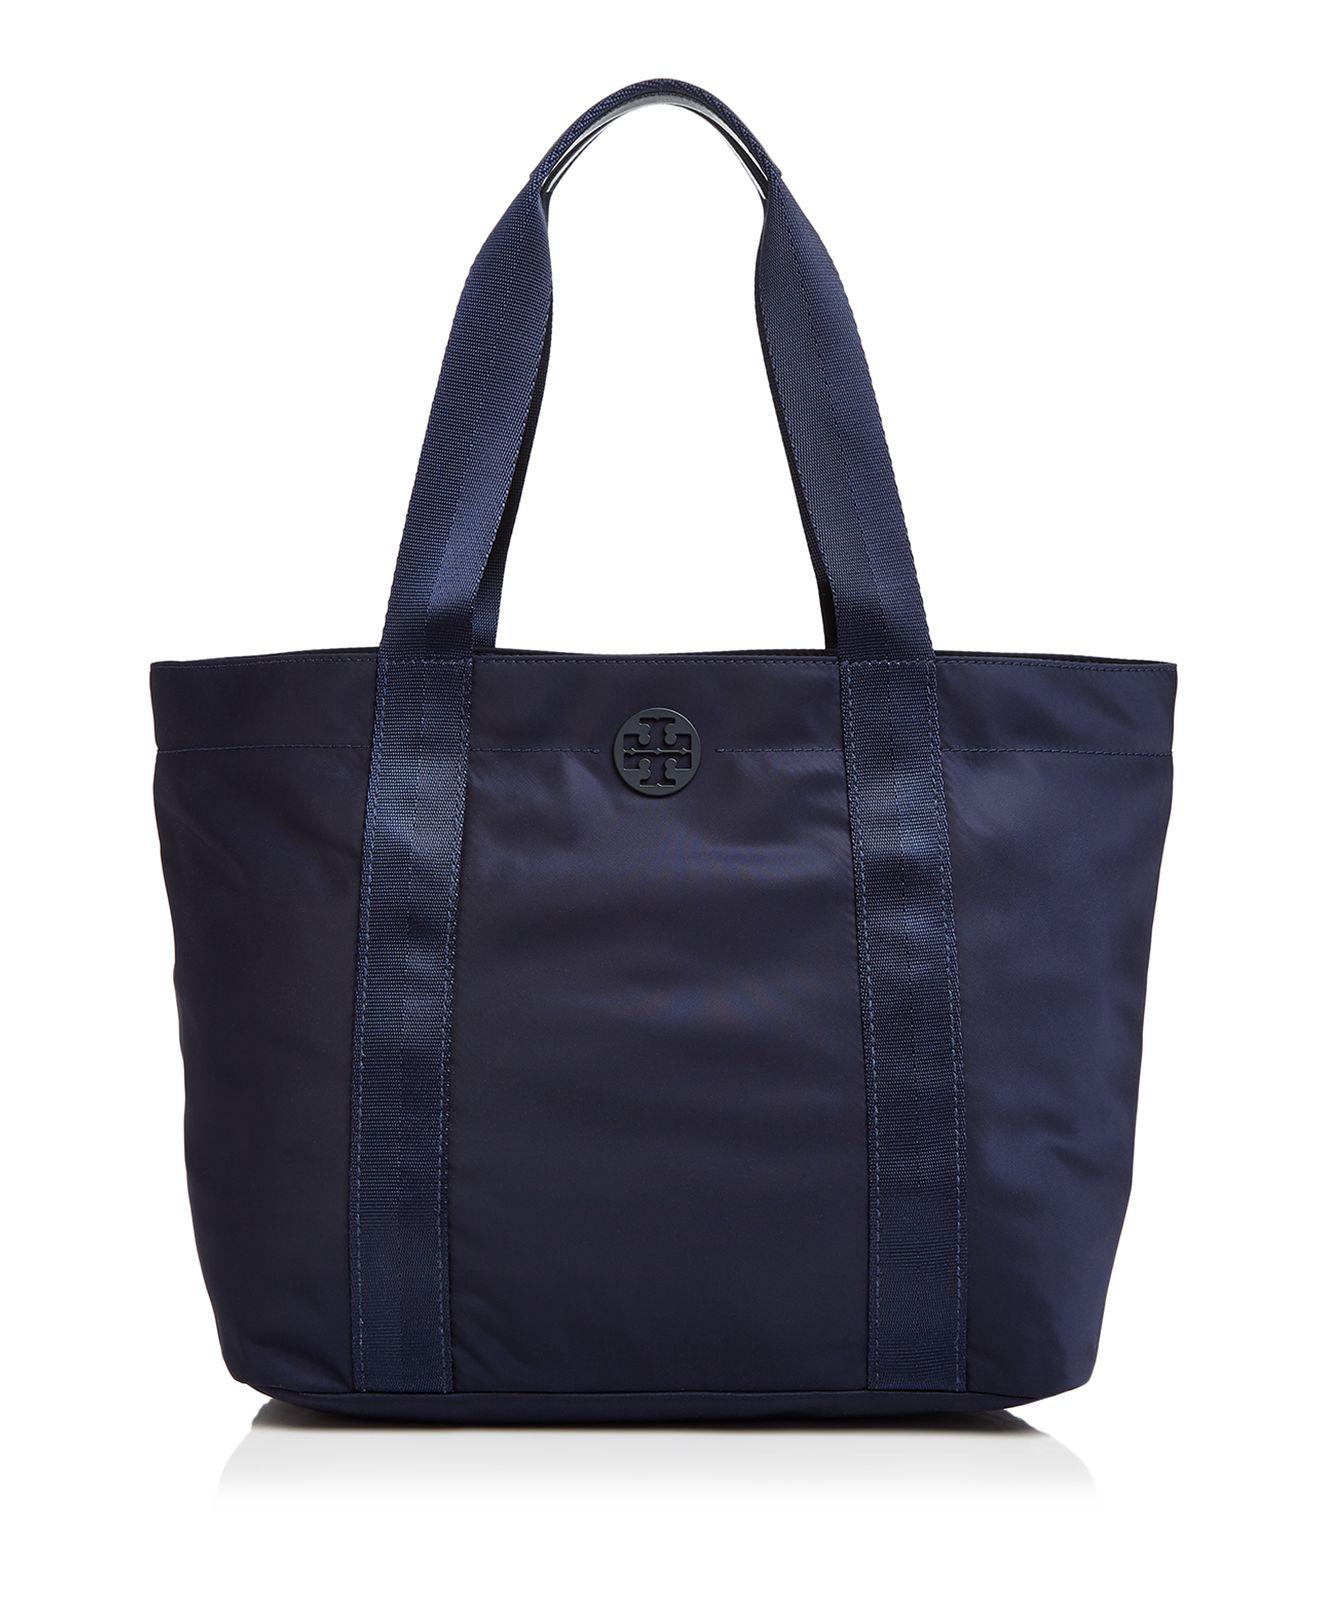 Tory Burch Synthetic Quinn Large Zip-top Nylon Tote Bag in Blue - Lyst